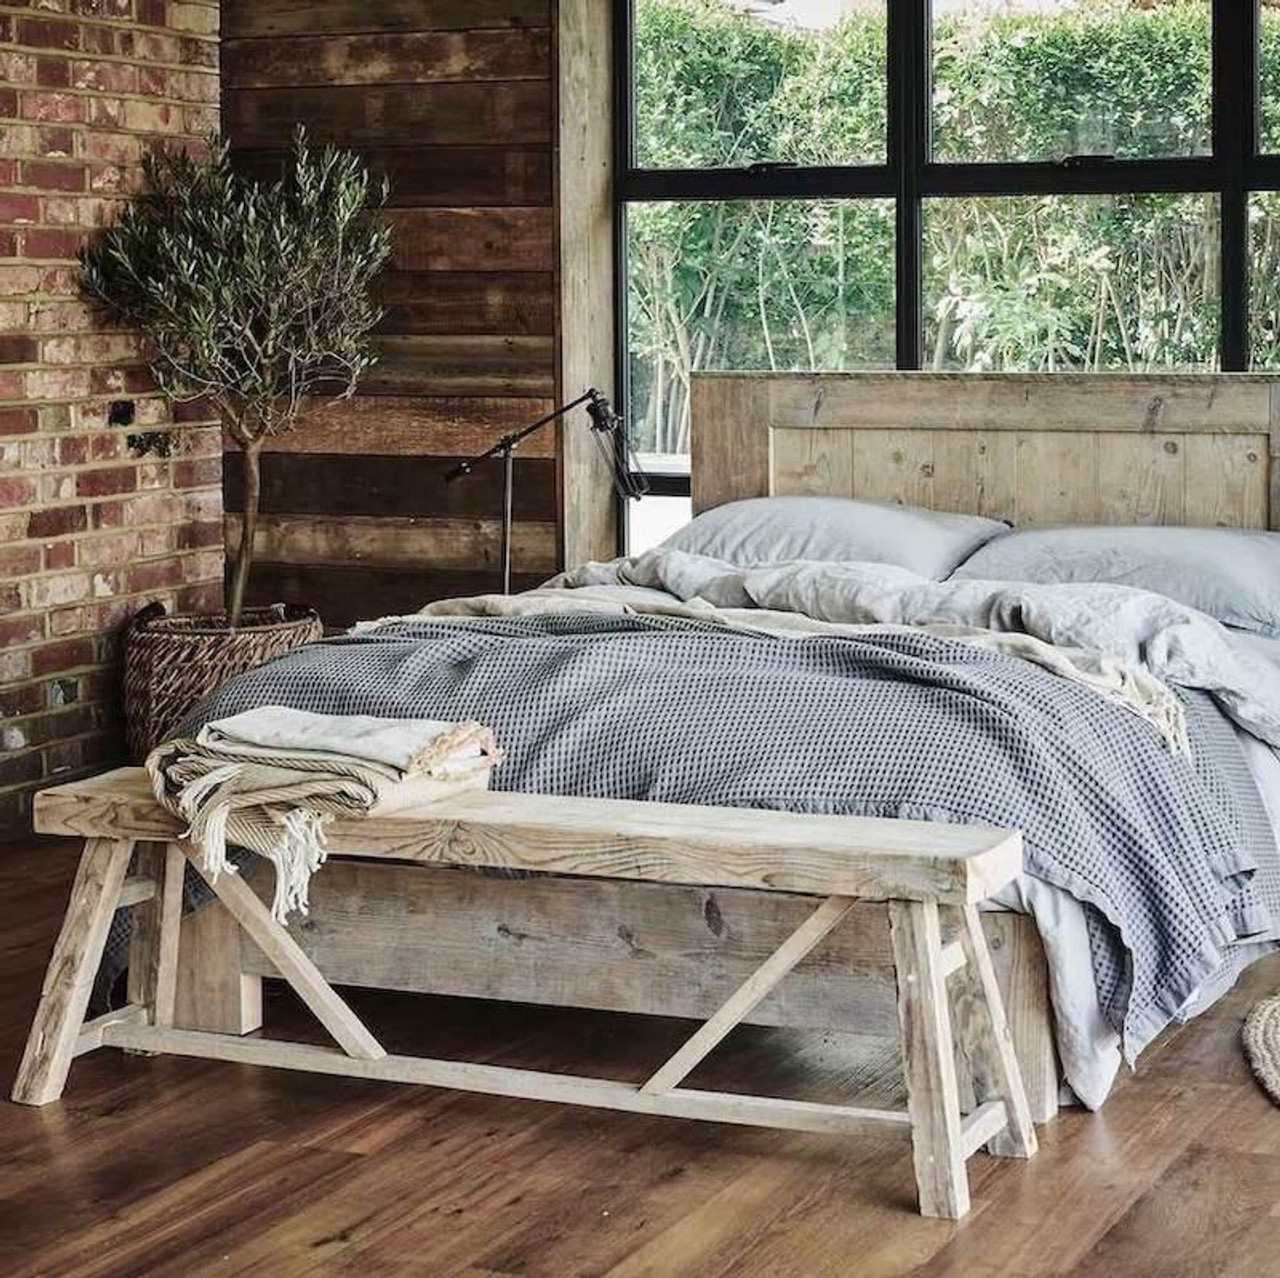 An image of an aged wooden bed frame with bed made